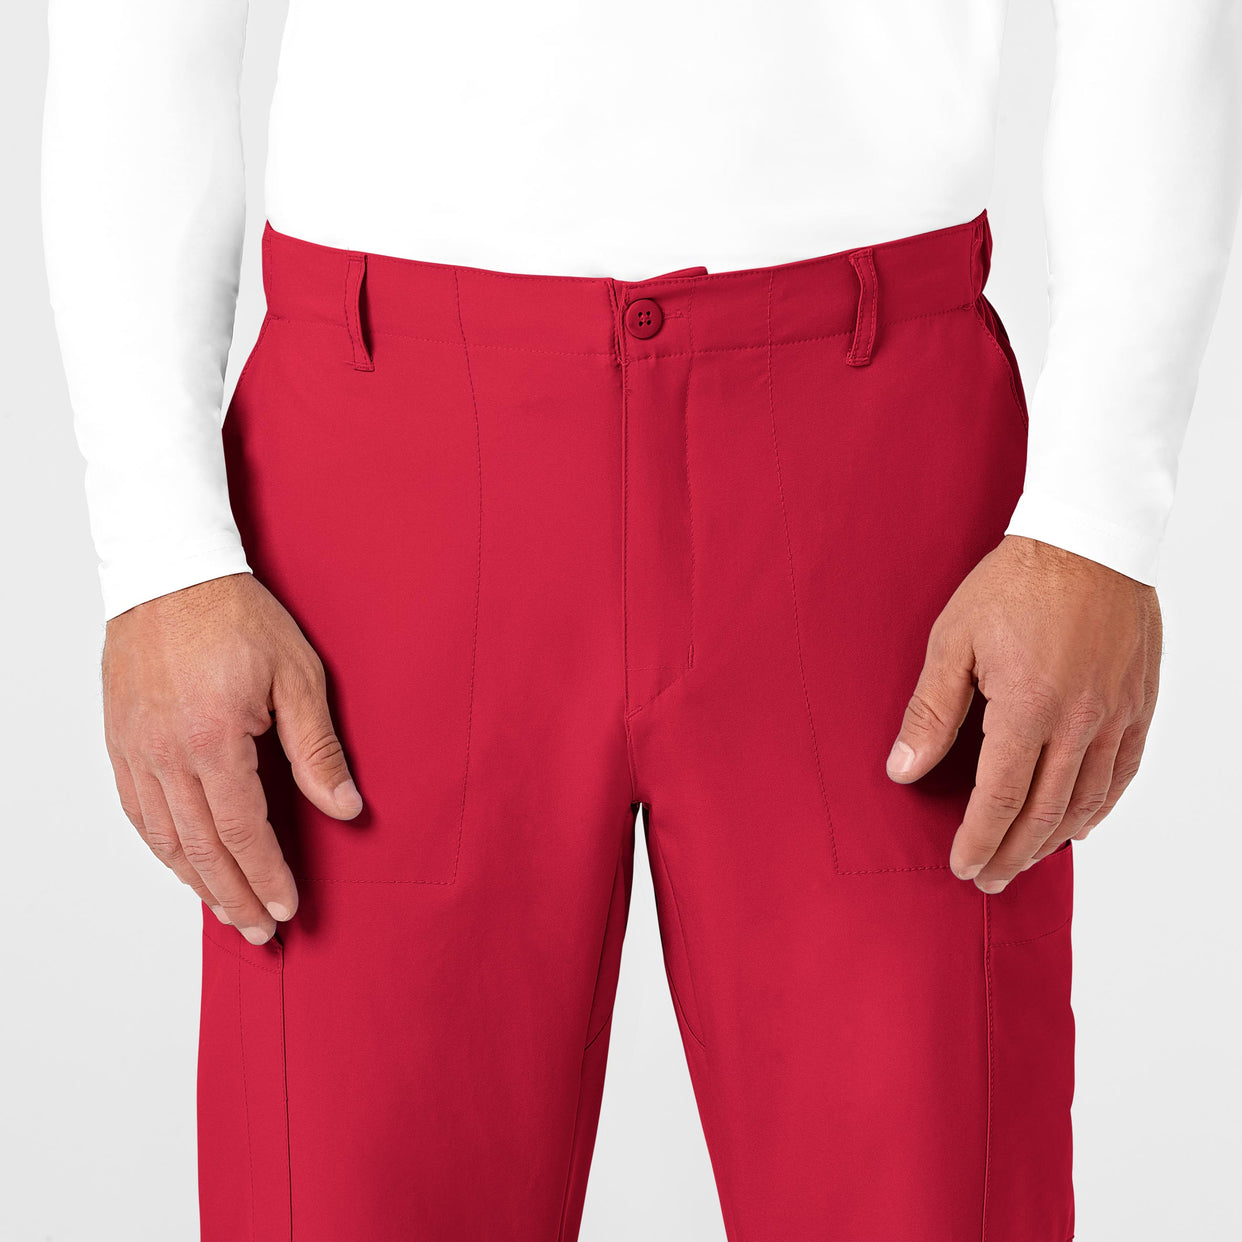 W123 Men's Flat Front Cargo Scrub Pant Red front detail